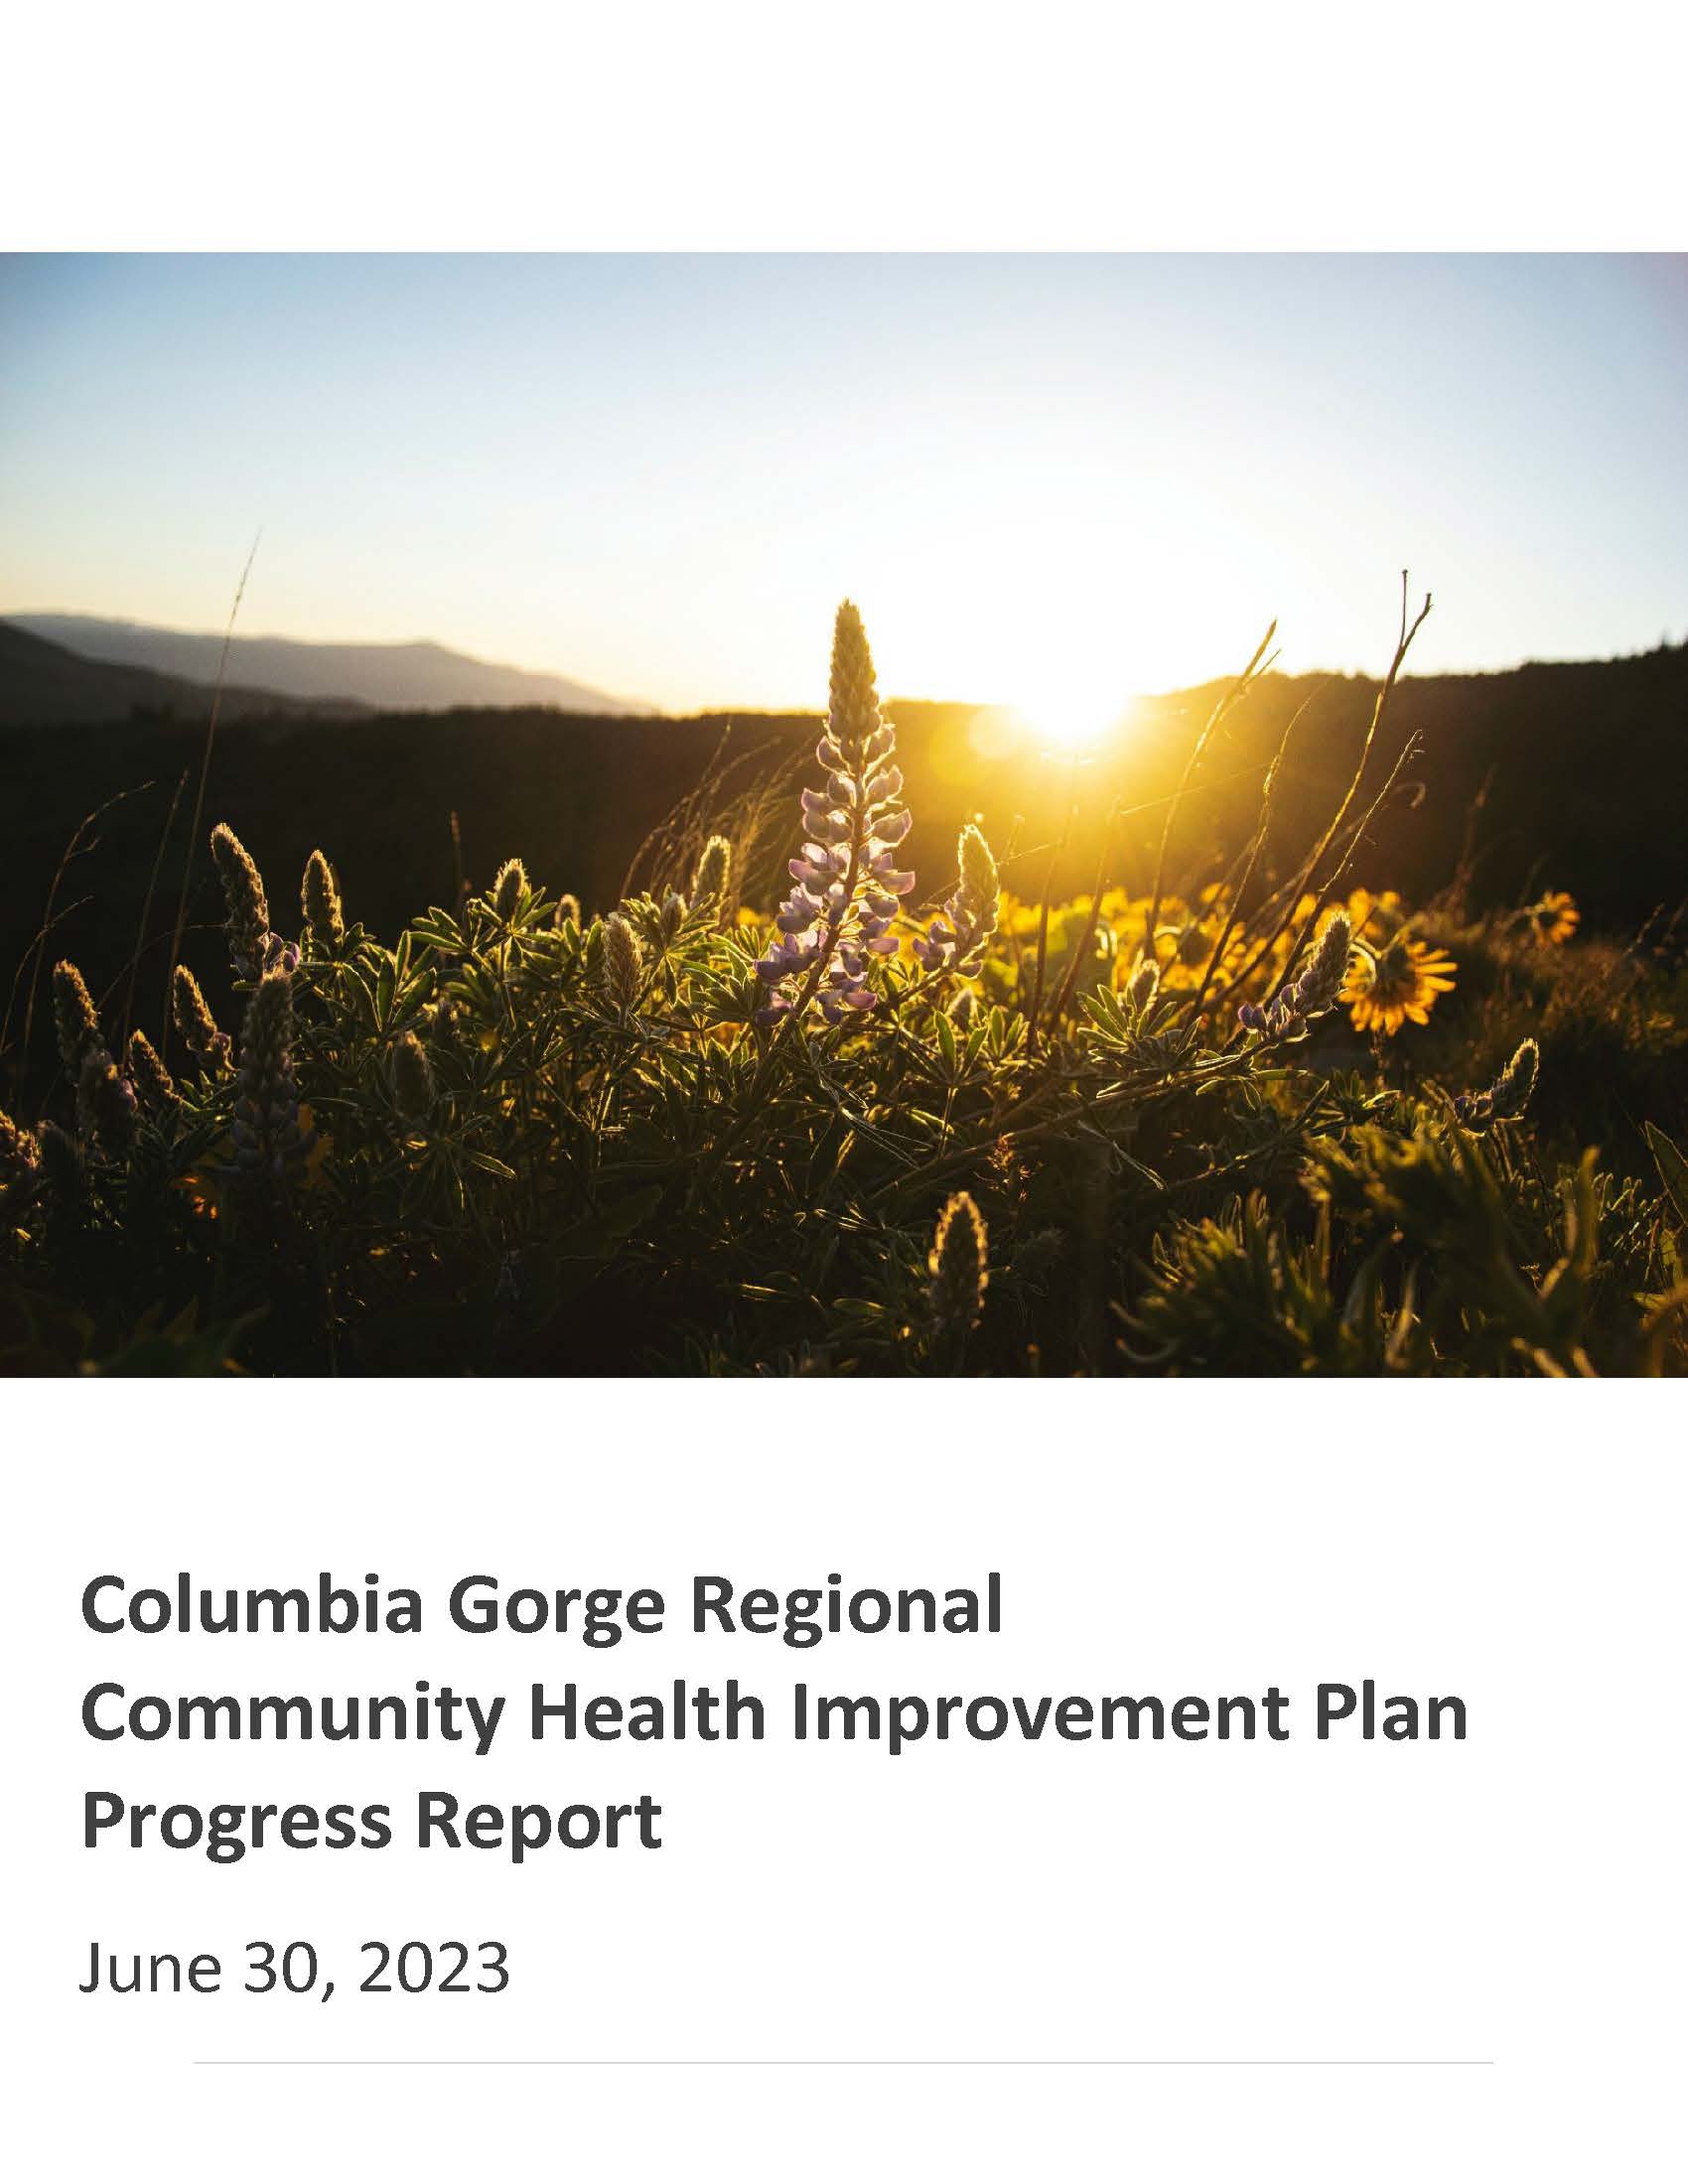 2023 Columbia Gorge Regional Health Improvement Plan Progress Report cover page. Featuring a photo of the Columbia River between Oregon and Washington State with purple flowers blooming in the foreground.